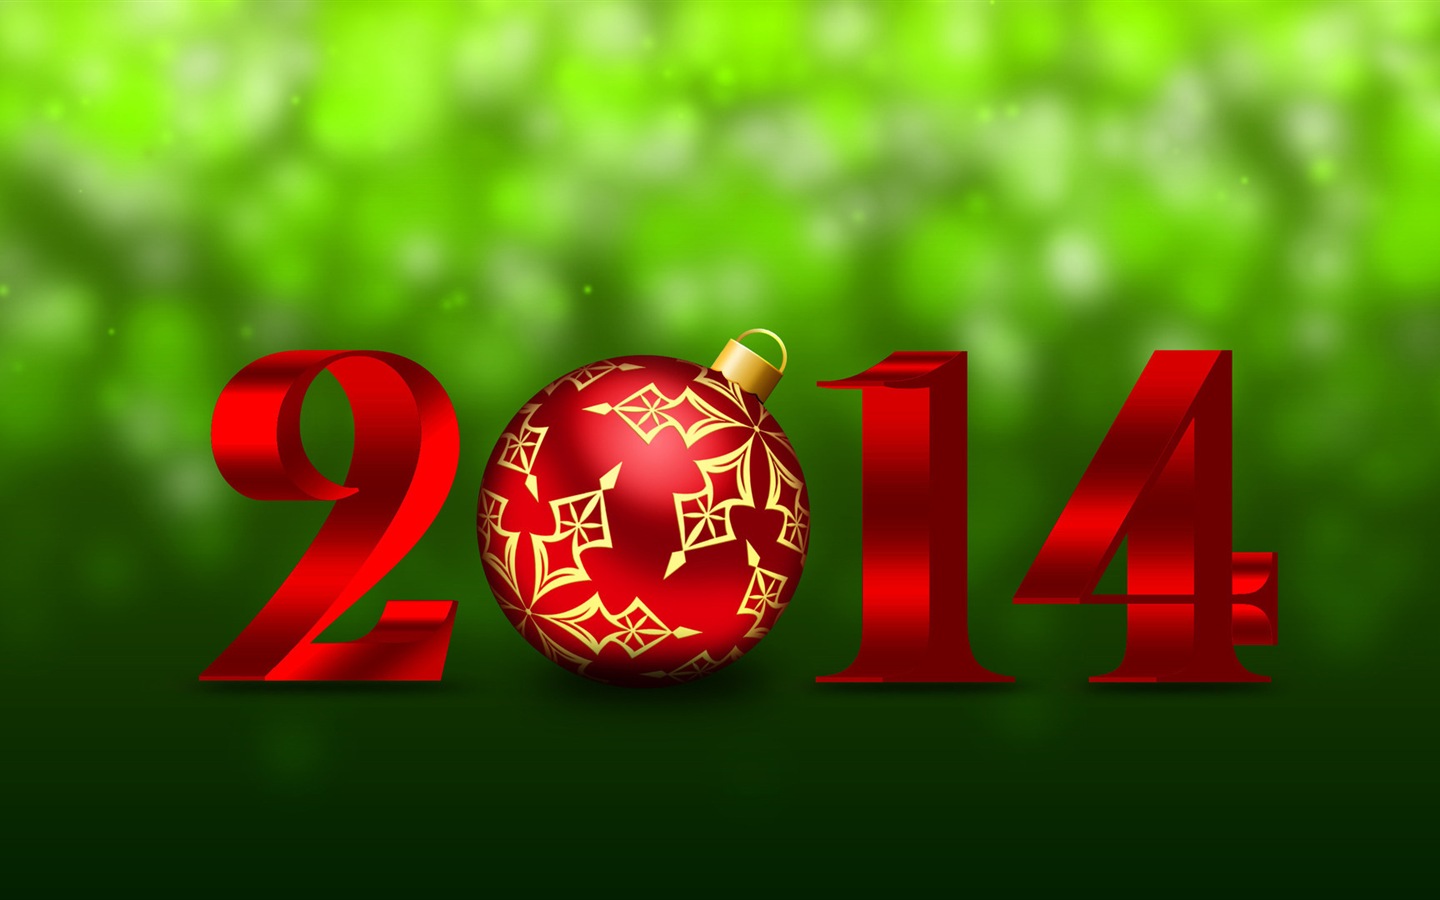 2014 New Year Theme HD Wallpapers (1) #3 - 1440x900